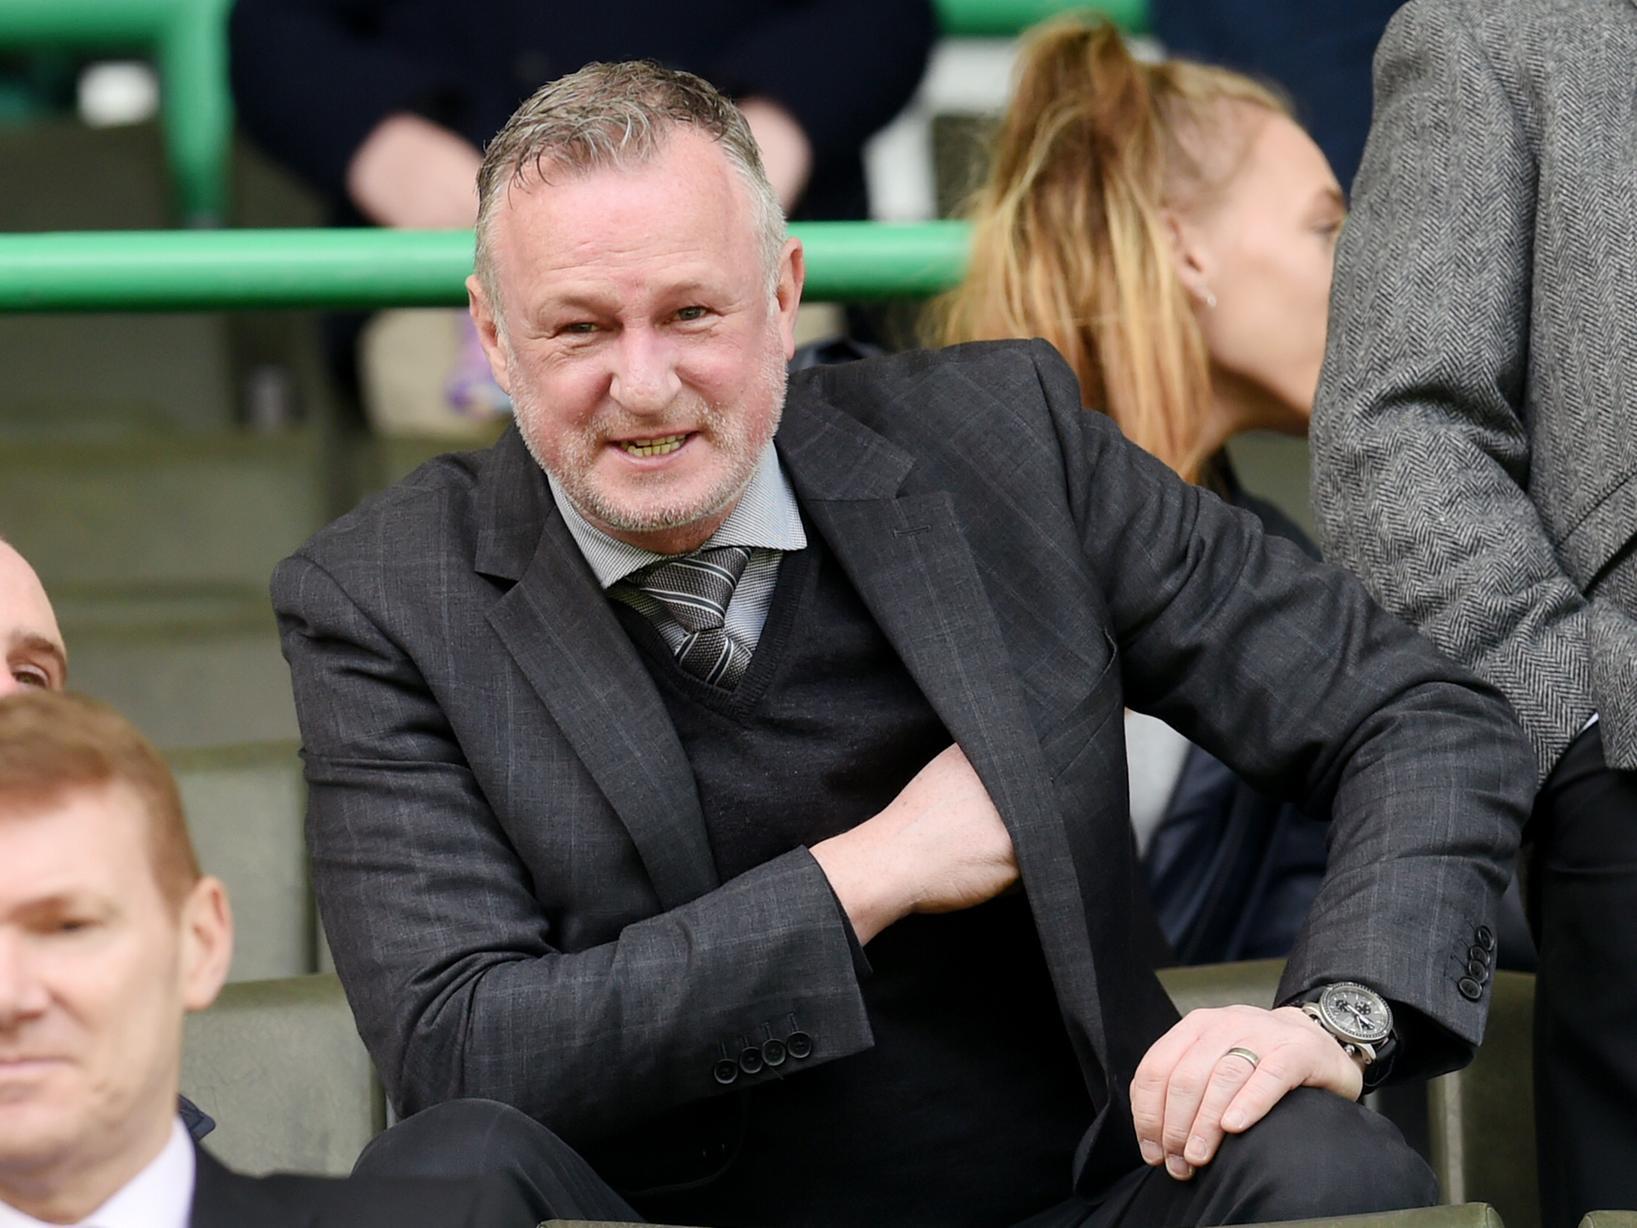 Northern Ireland manager Michael O'Neill has been a rumoured target in the past, most likely due to his residence in Edinburgh. His bumper contract with the Irish FA would probably make any move unlikely.